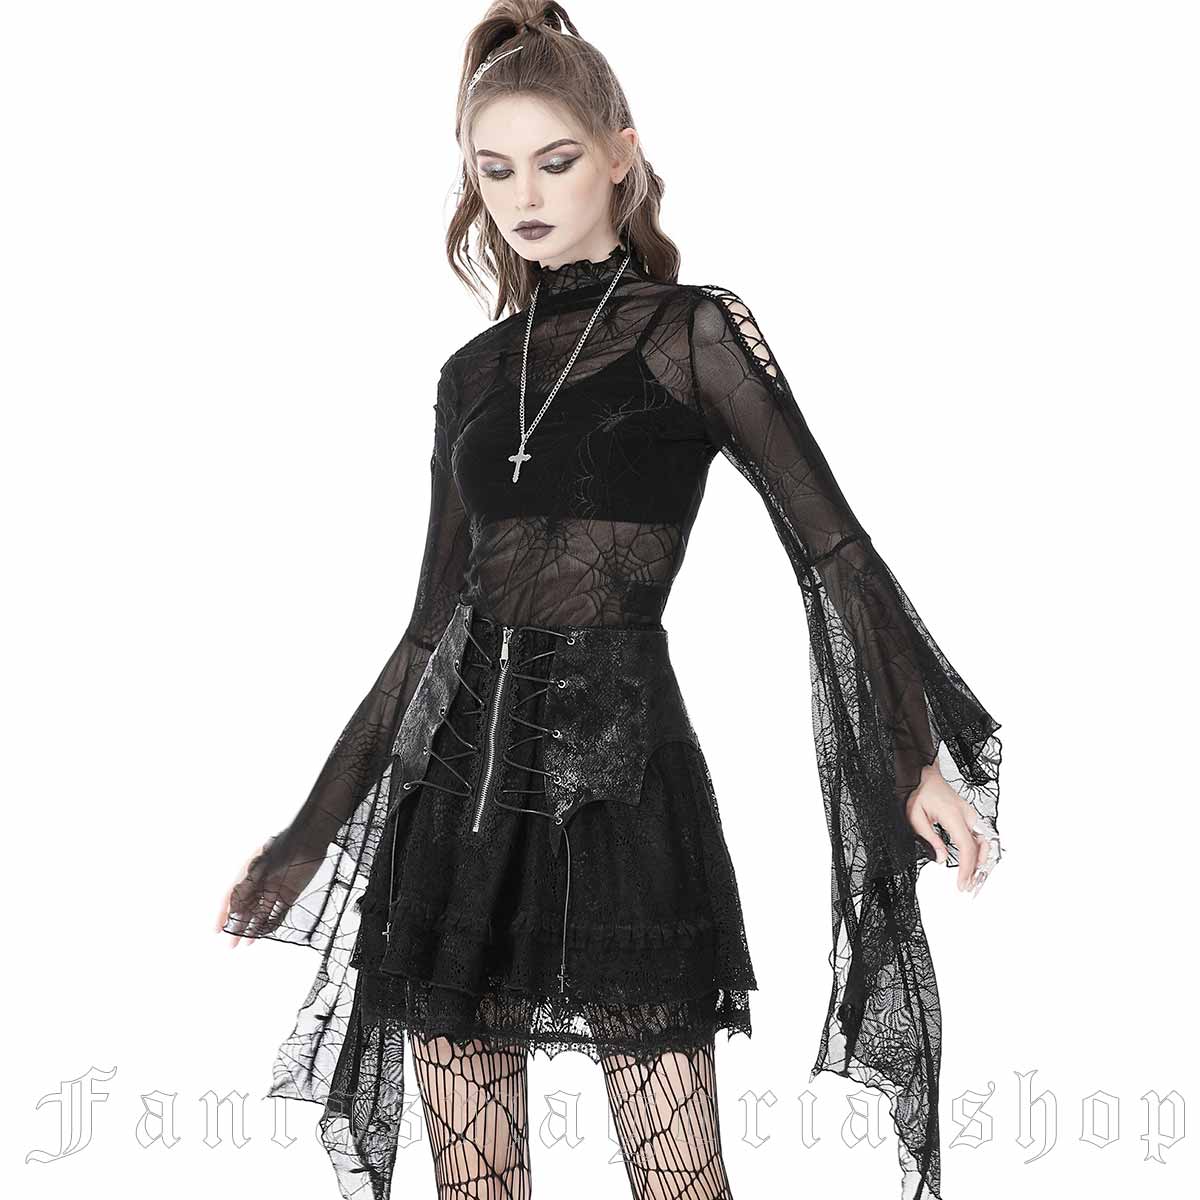 Gothic Black Bat Wings Layered Lace Choker Necklace